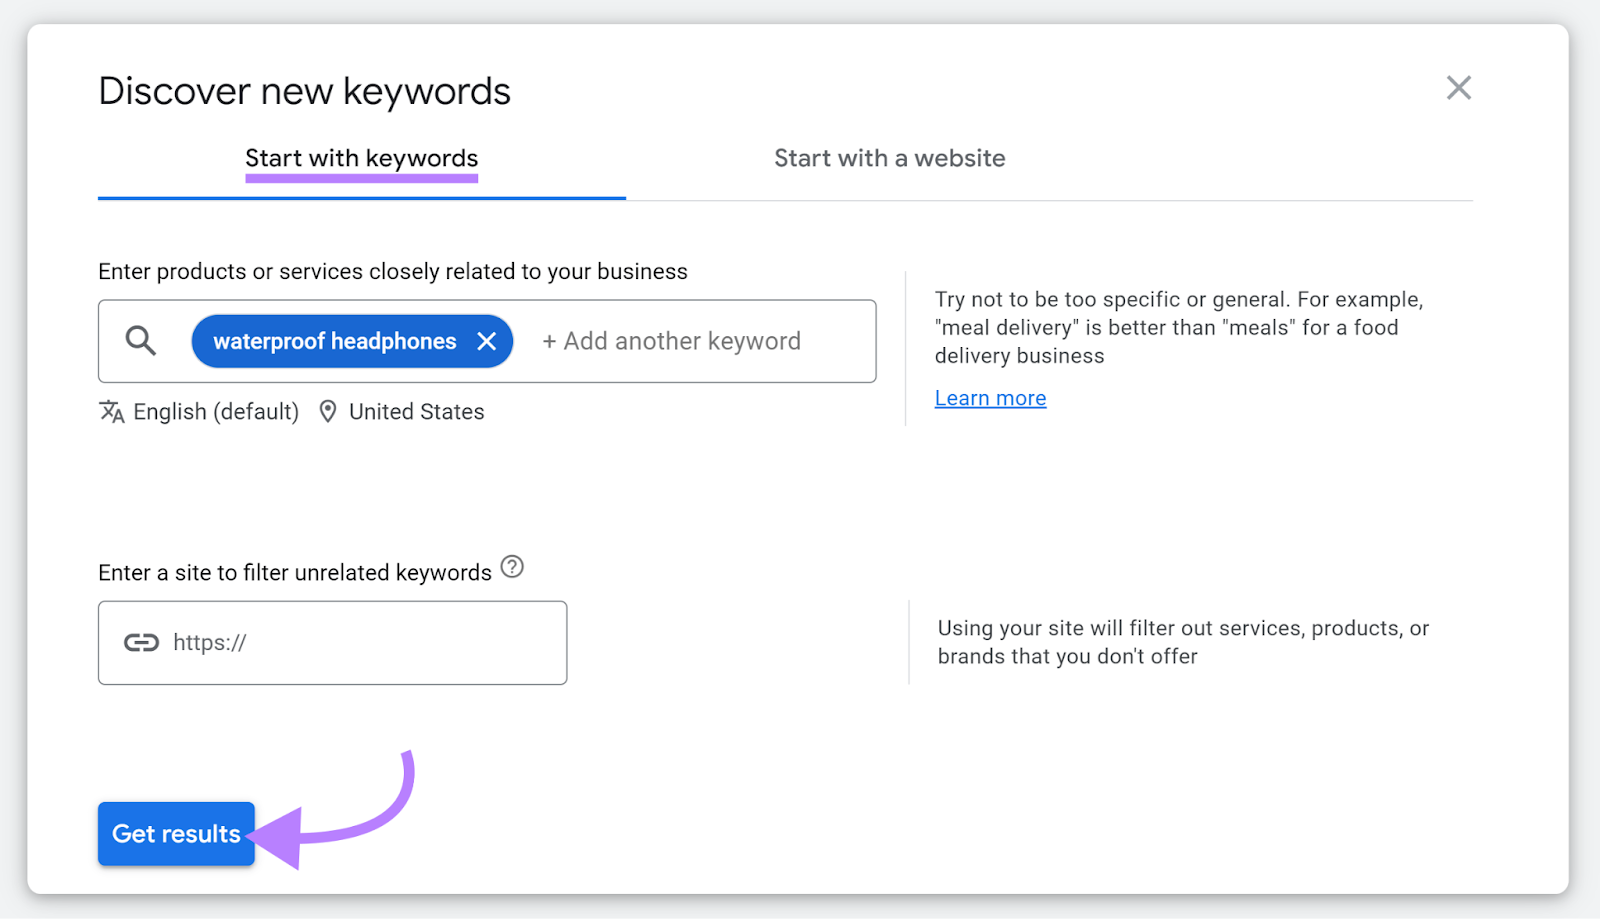 Start with keywords tab selected, keyword entered, and Get results button highlighted.